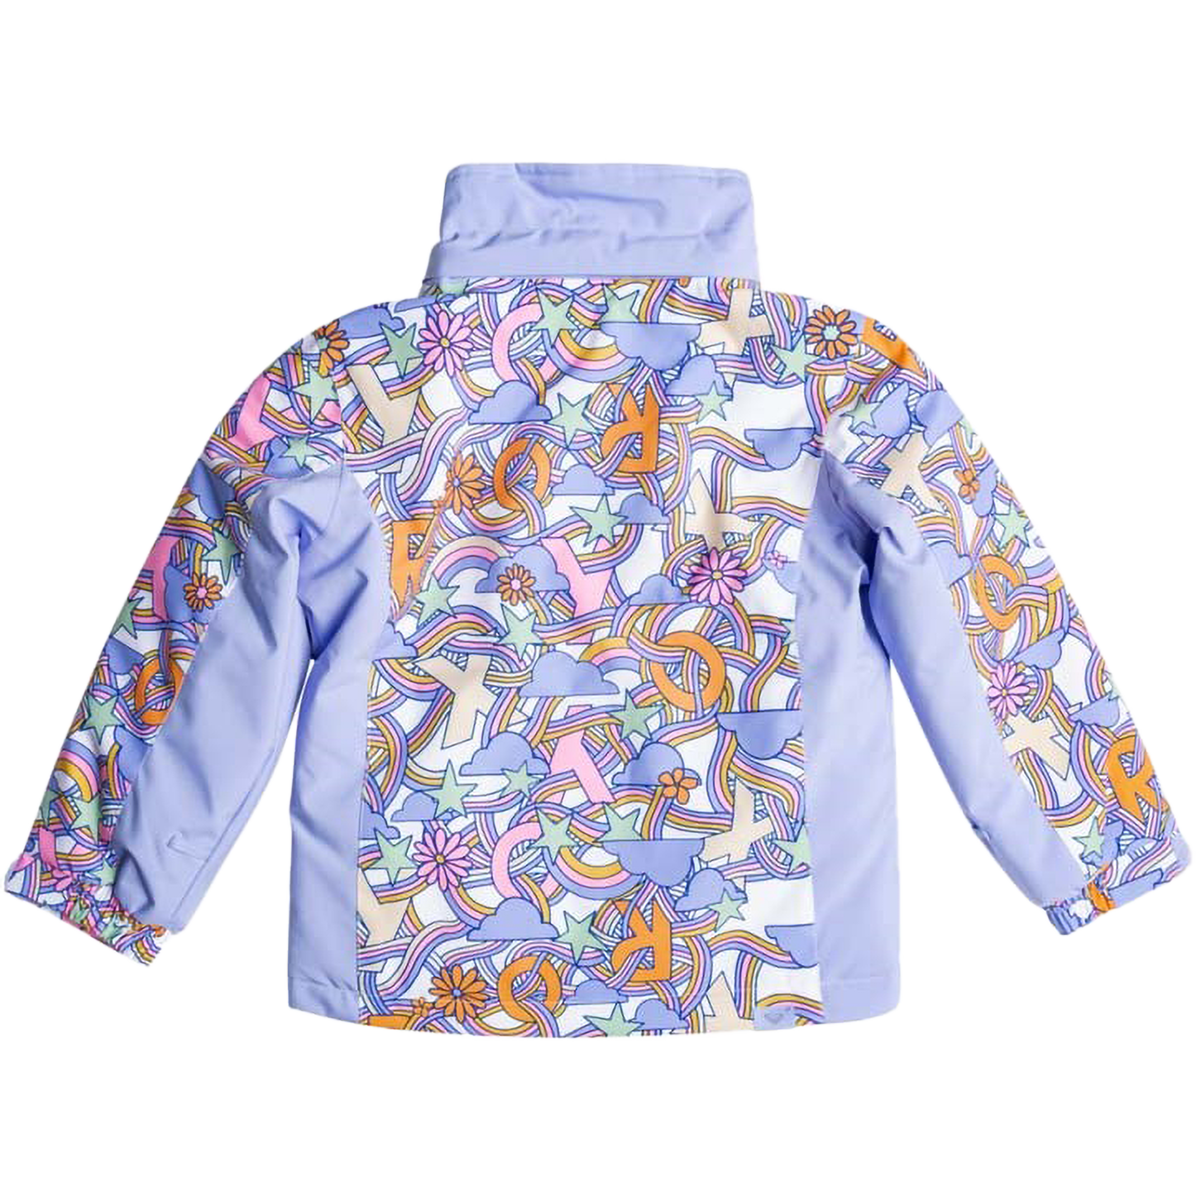 Youth Snowy Tale Girls Insulated Jacket alternate view